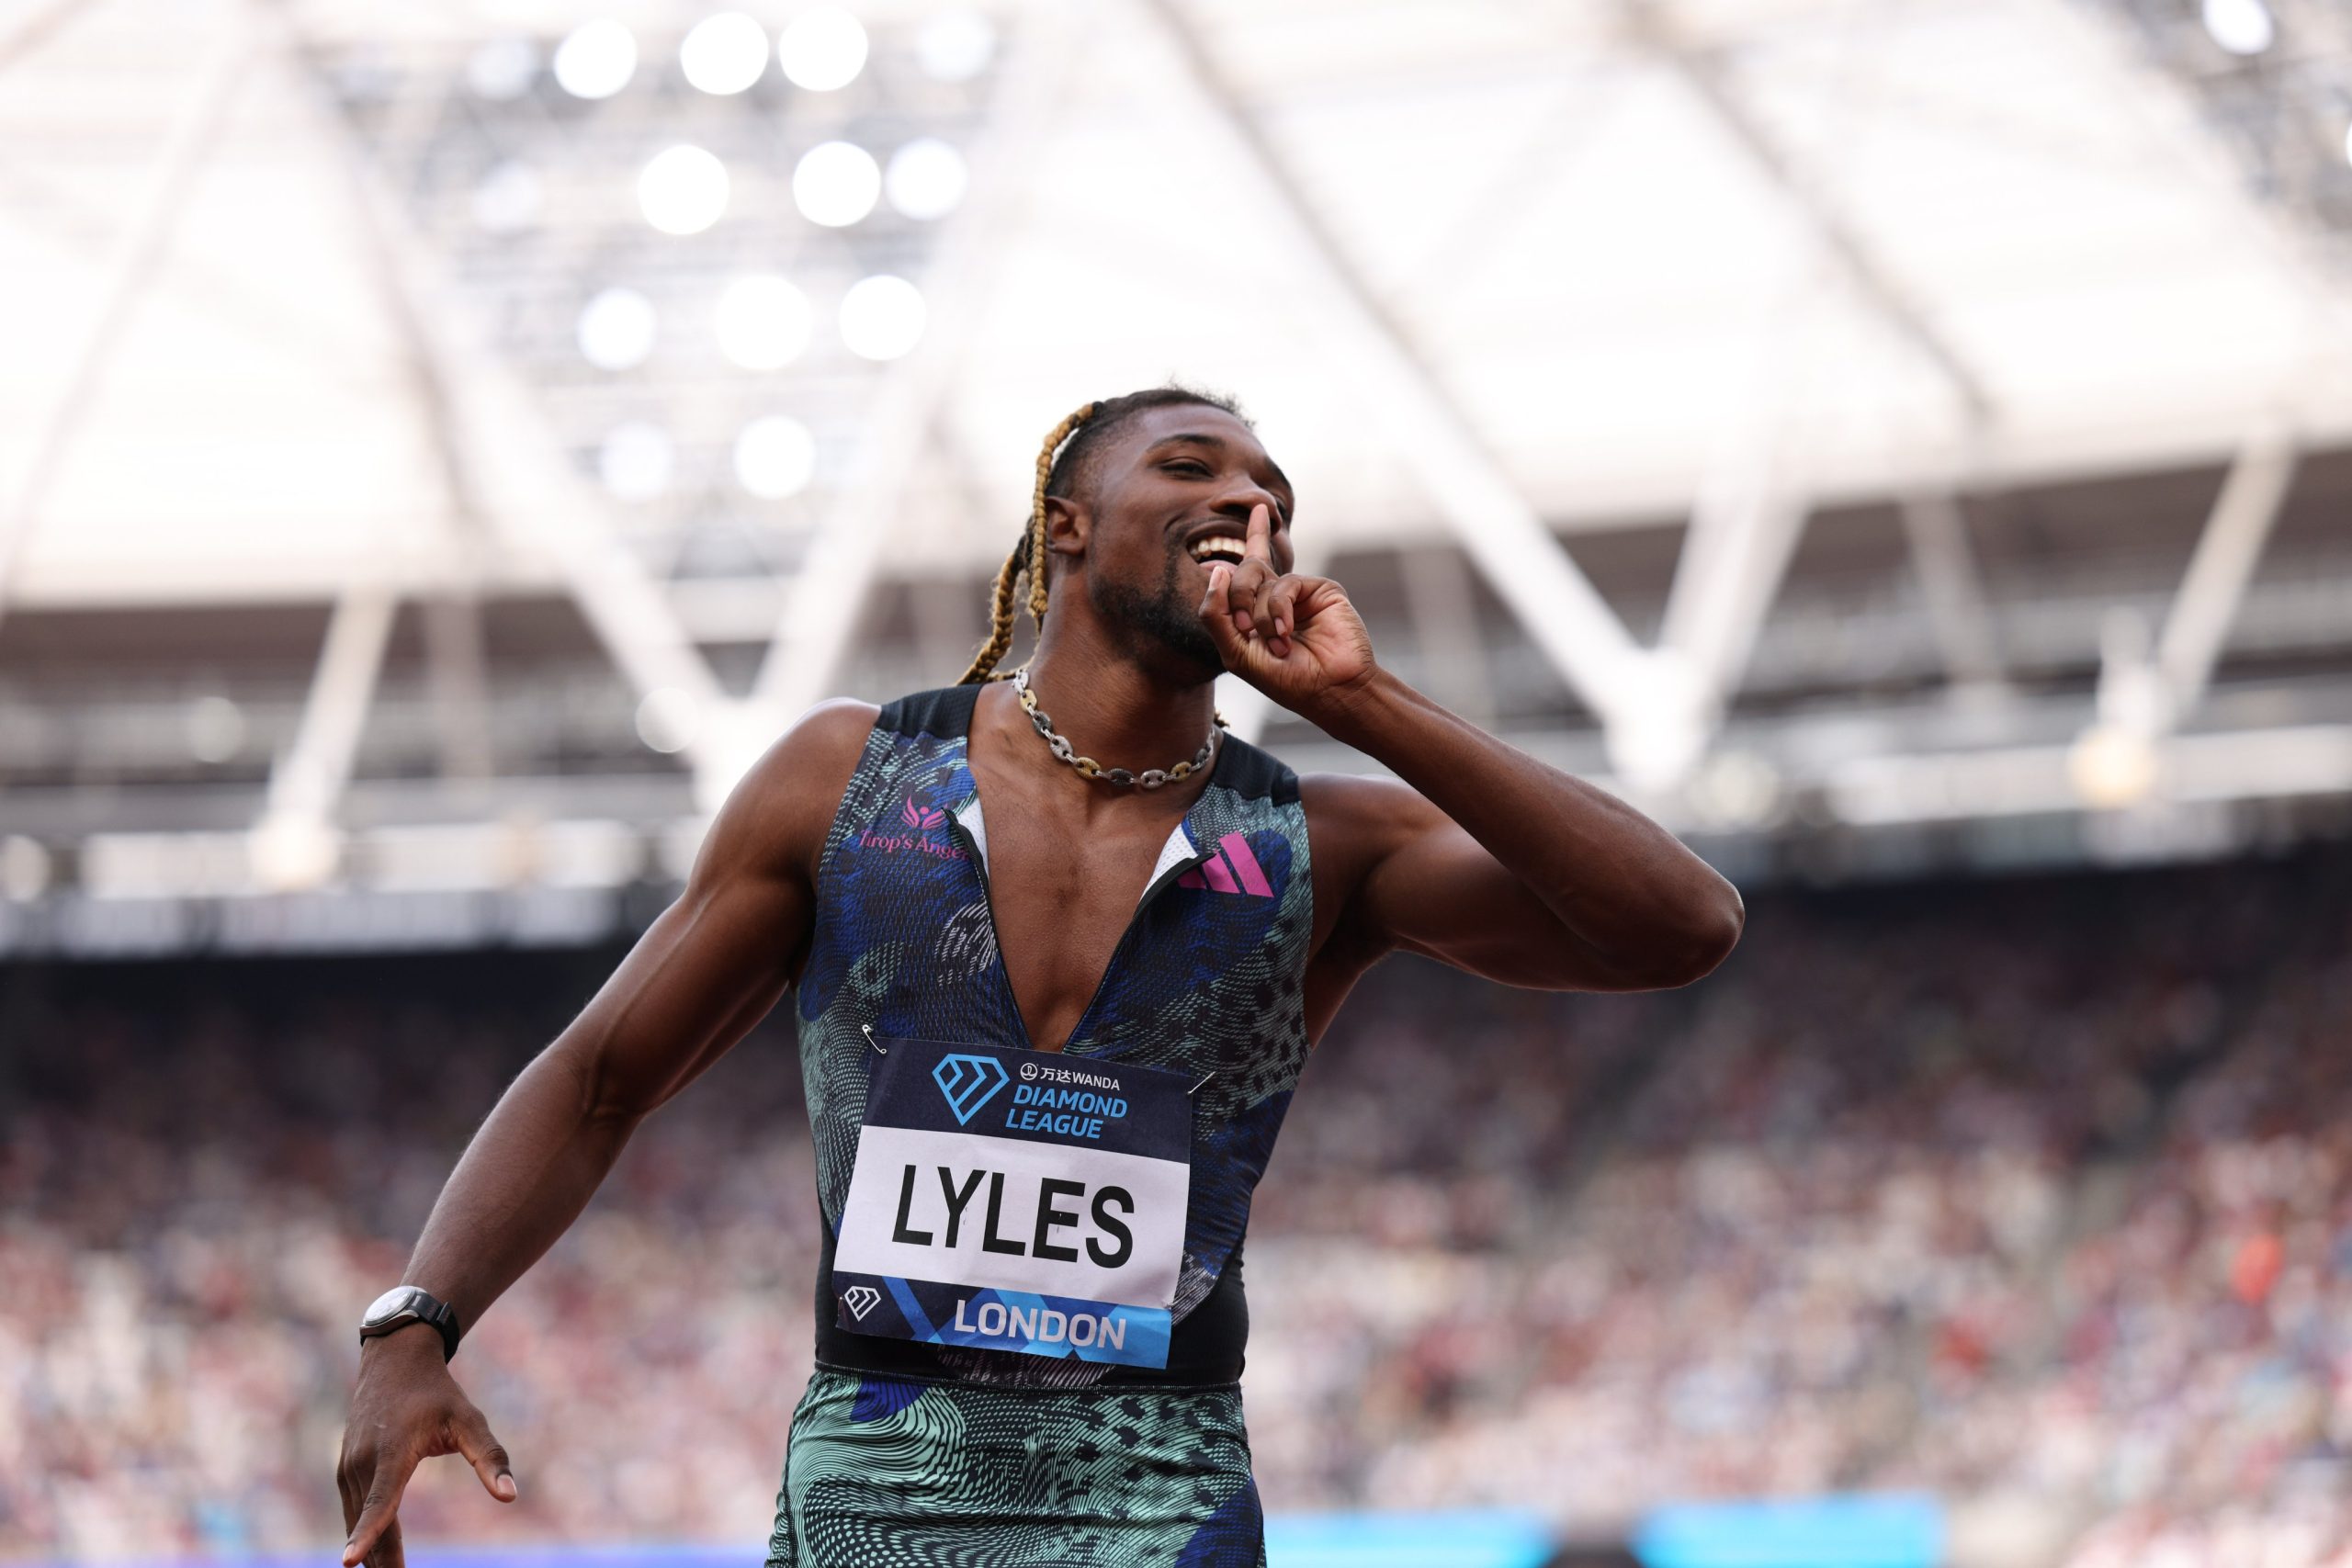 Adidas Atlanta City Games - Now at Zurich Diamond League - Speed Demon! Noah Lyles dominates the men's 200m, setting a world-leading and meeting record time at the London Diamond League